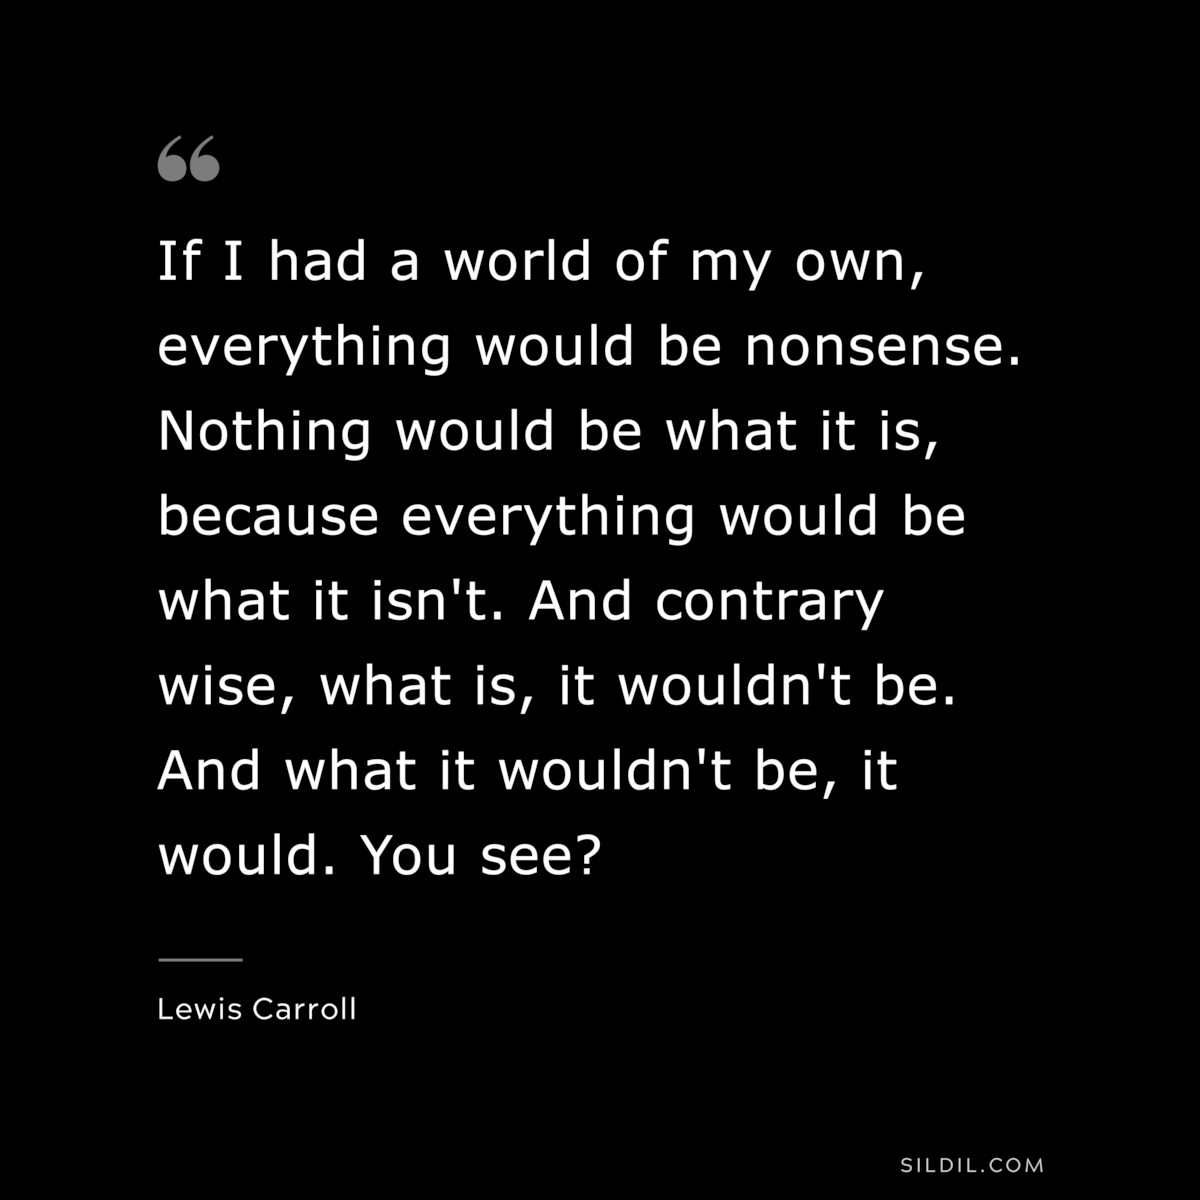 If I had a world of my own, everything would be nonsense. Nothing would be what it is, because everything would be what it isn't. And contrary wise, what is, it wouldn't be. And what it wouldn't be, it would. You see?